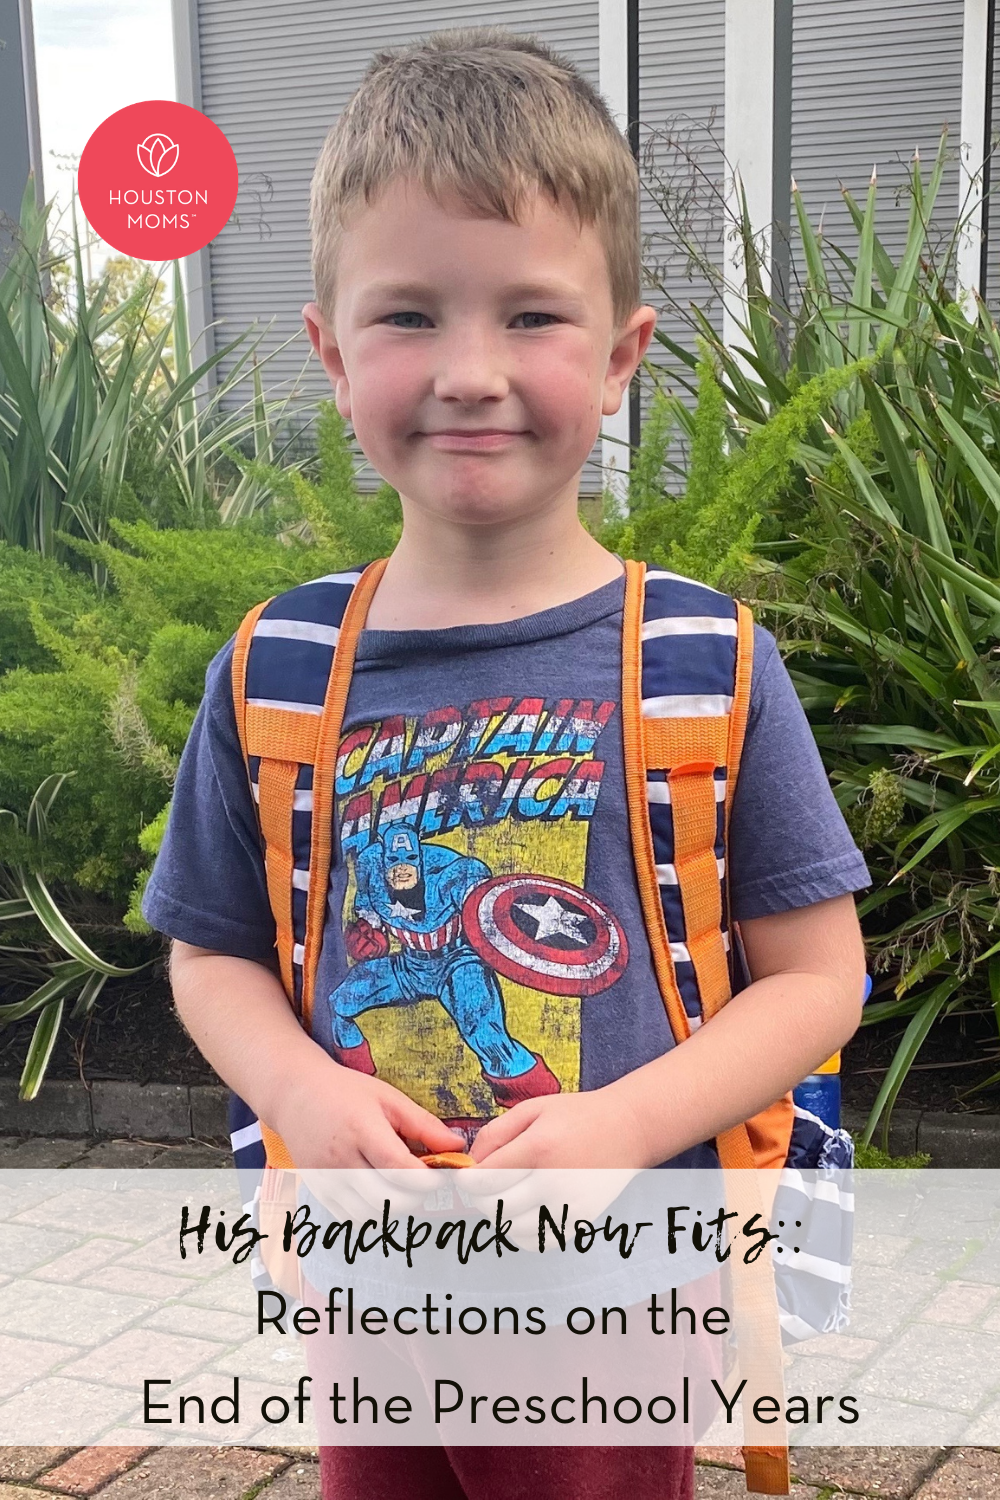 Houston Moms "His Backpack Now Fits:: Reflections on the End of the Preschool Years" #houstonmoms #houstonmomsblg #momsaroundhouston